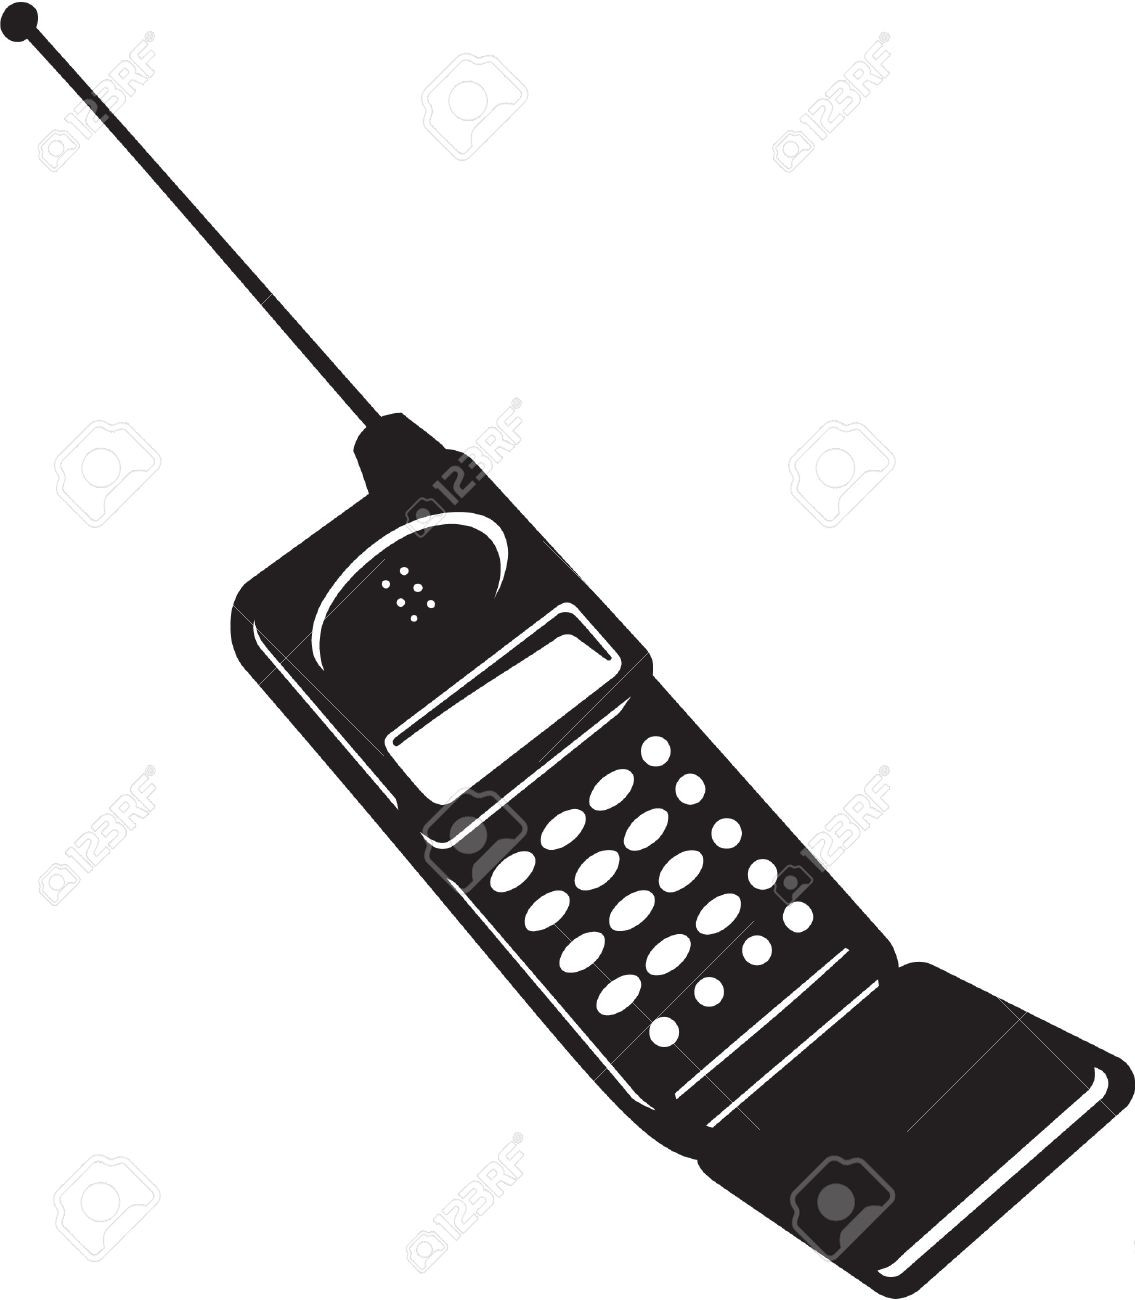 Mobile phone clipartxtras in. Cellphone clipart black and white